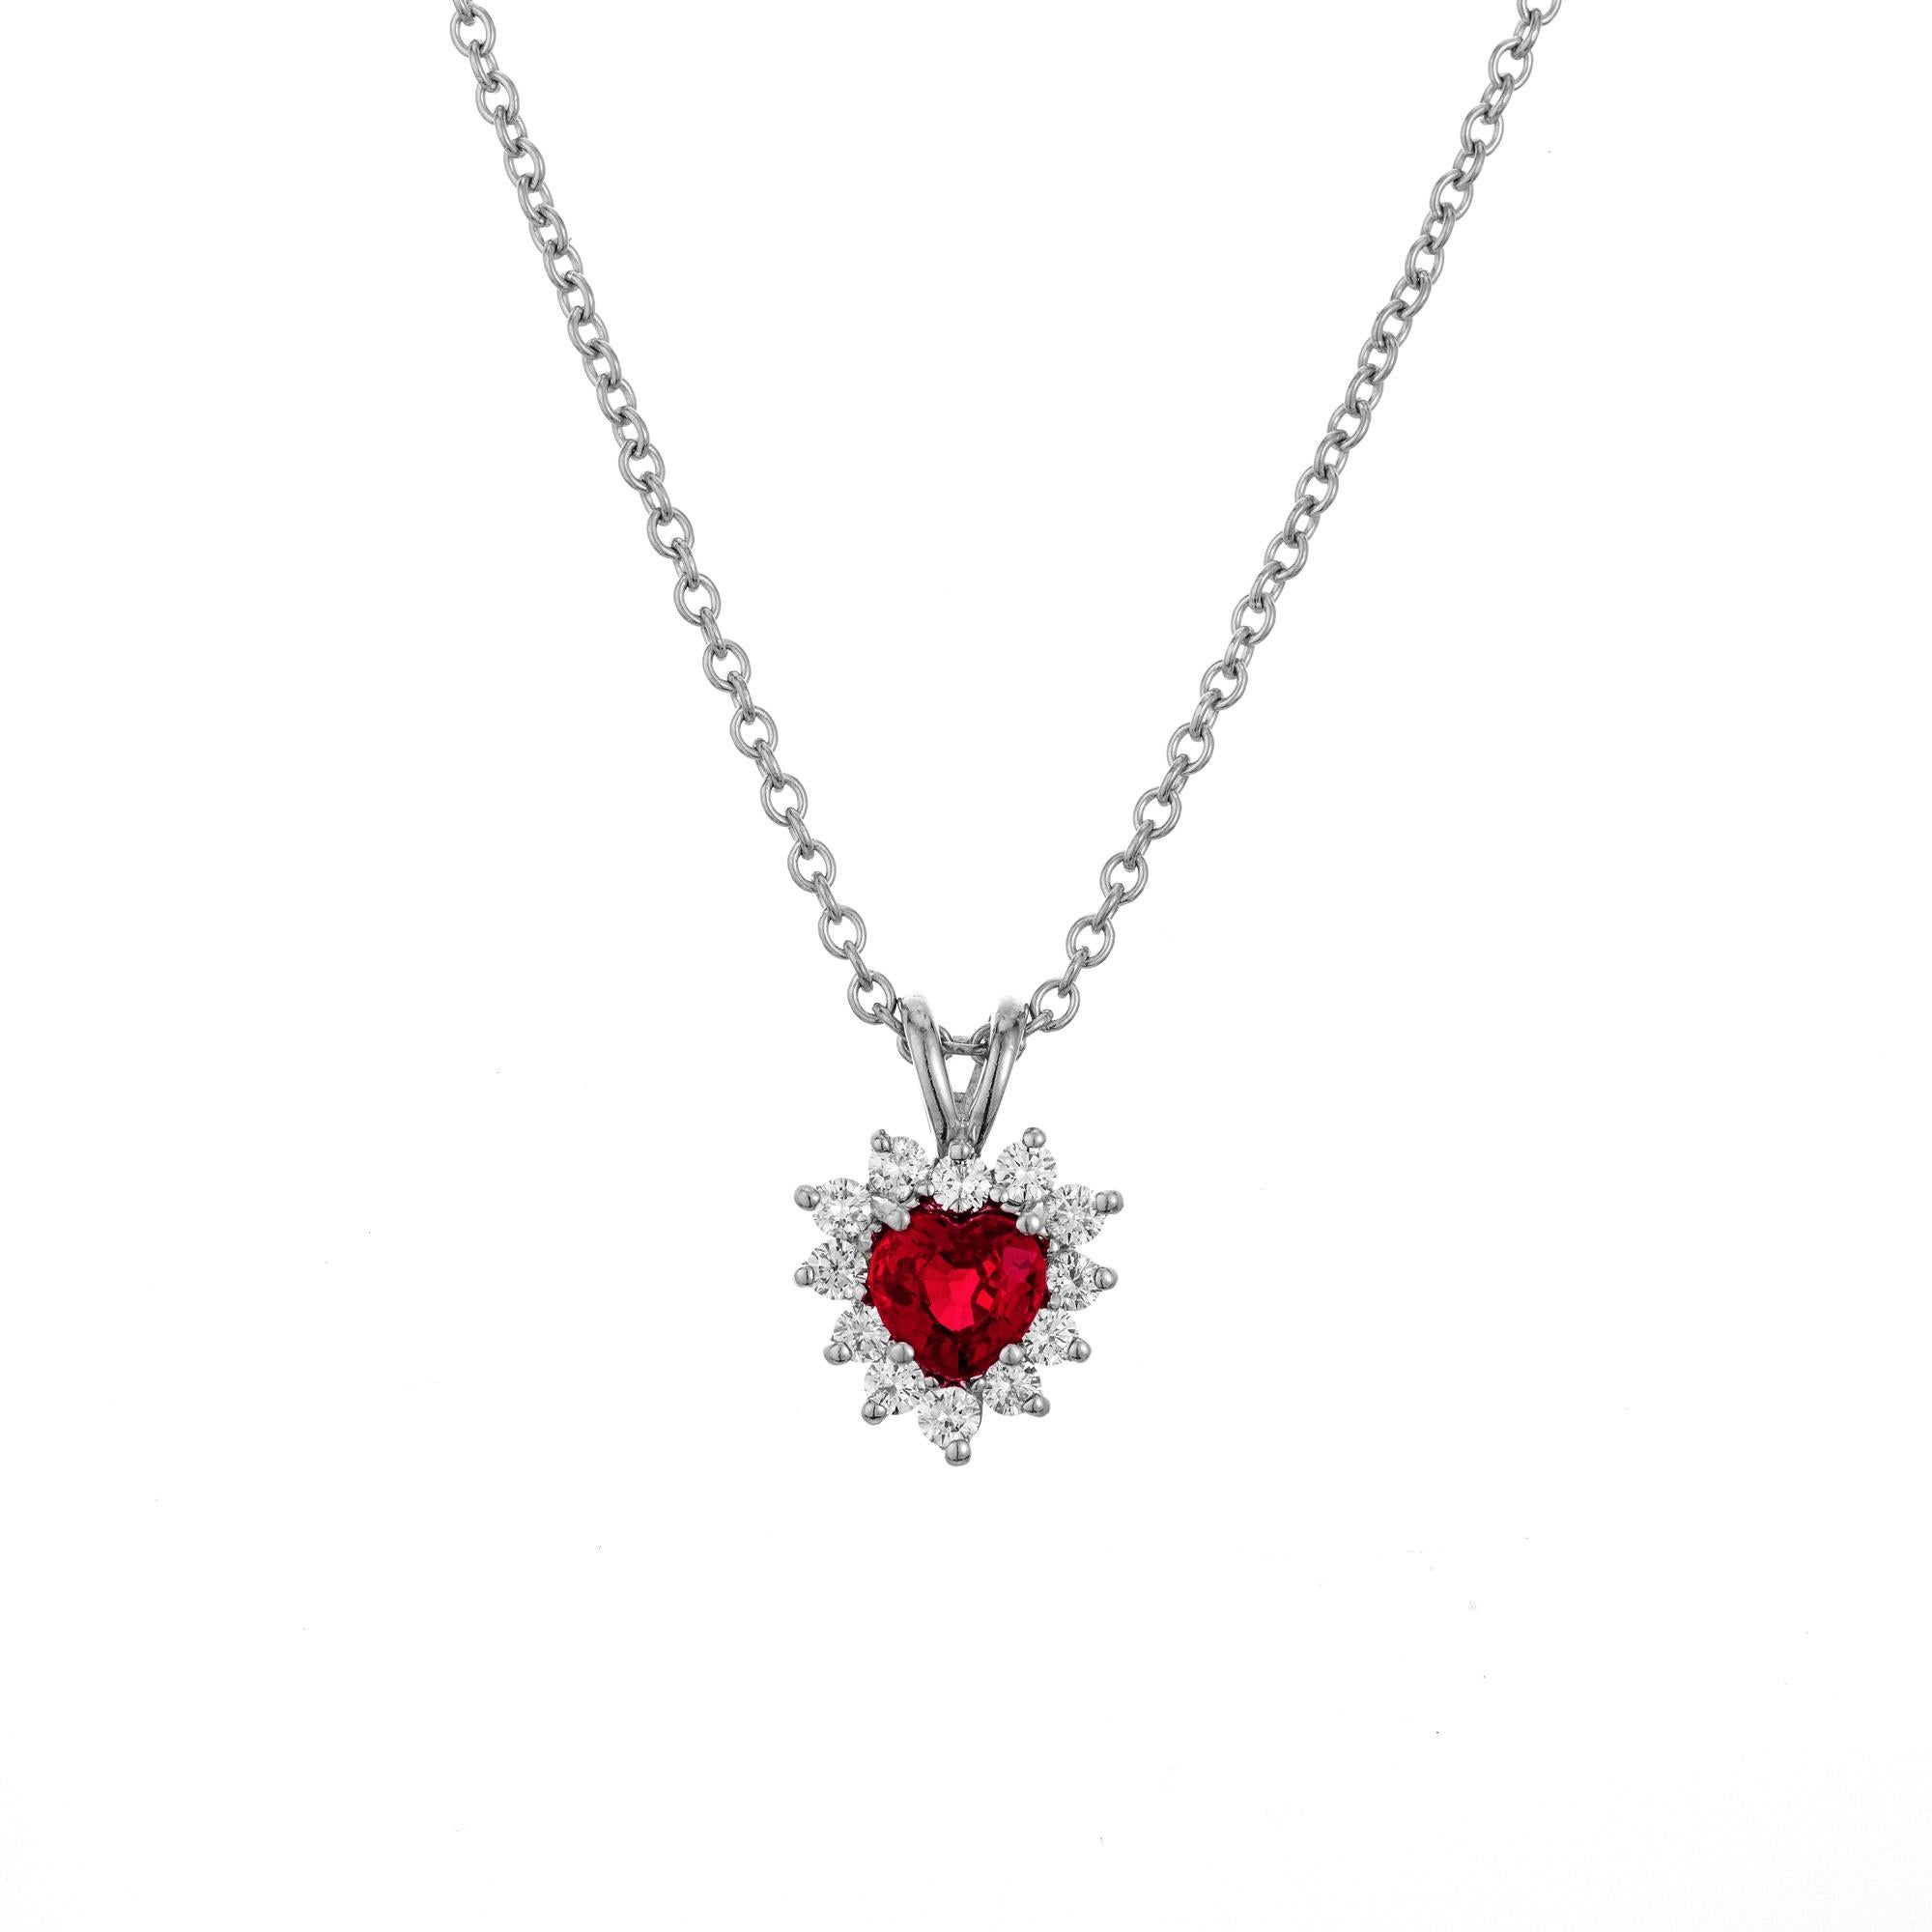 Ruby and diamond pendant necklace. This piece begins with a heart shaped ruby mounted in a platinum setting with a halo of  11 round brilliant cut diamonds. GIA has certified the ruby as simple heat with minor residue. An 18 inch platinum chain. 

1